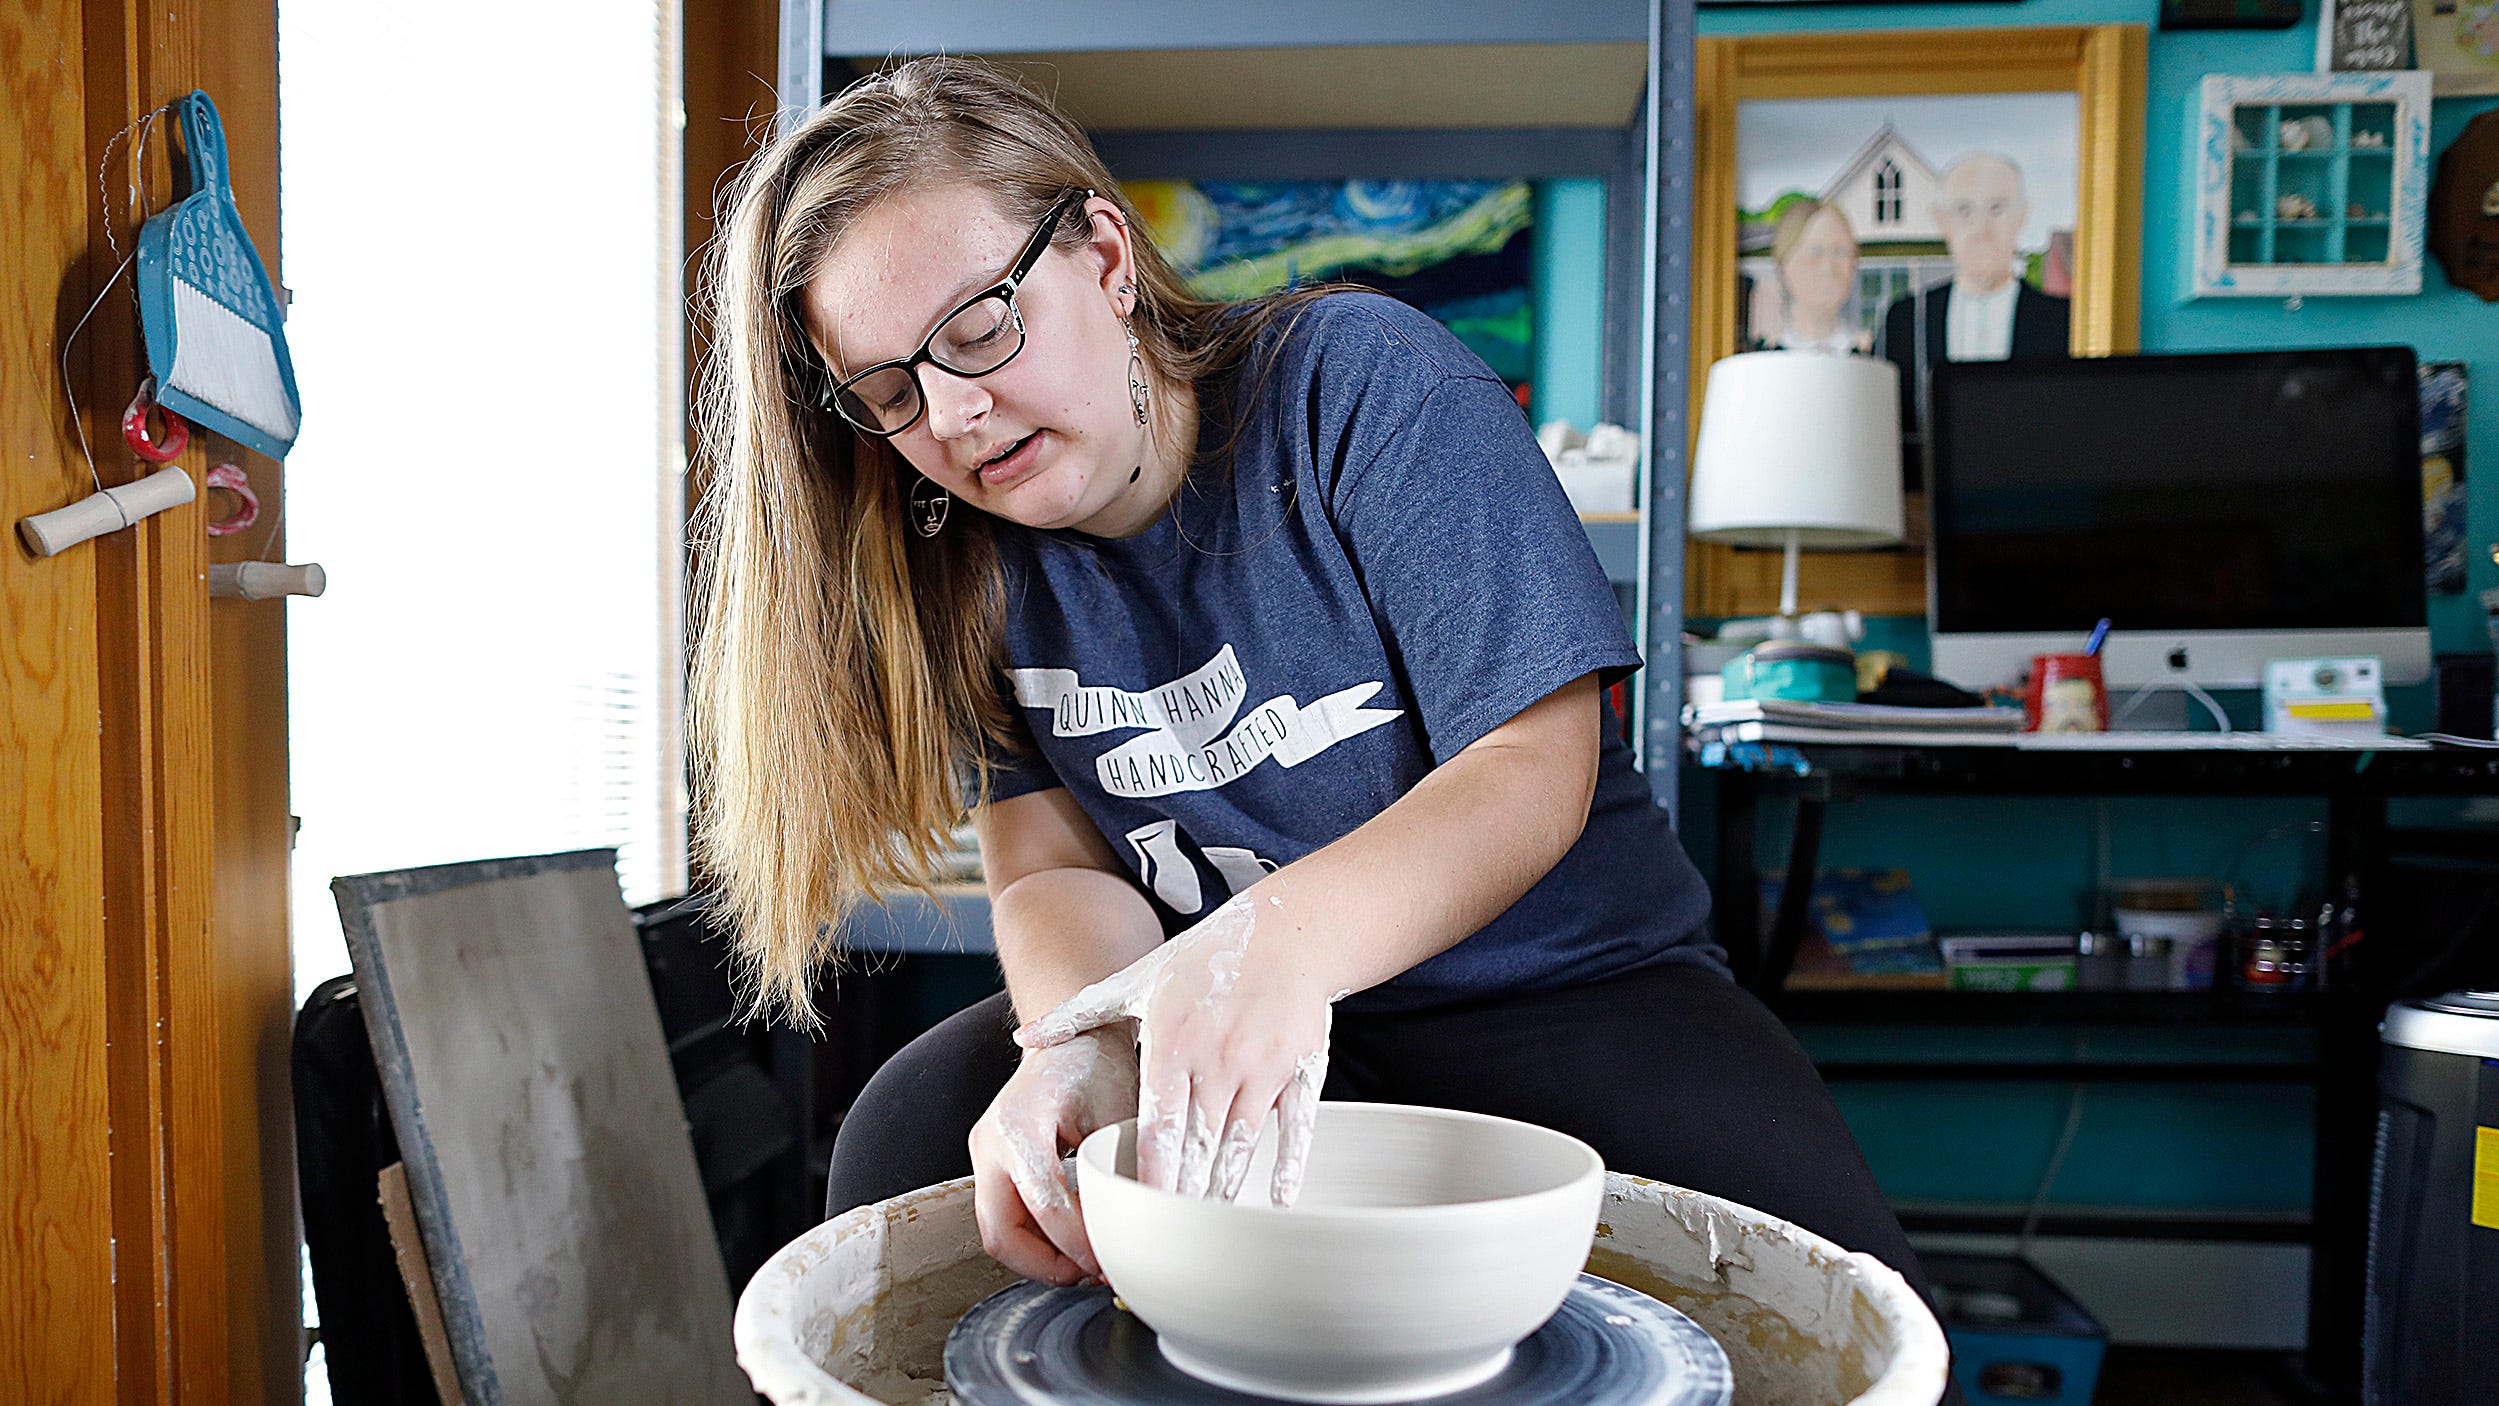 Fort Hayes student goes viral on TikTok with ceramics creations